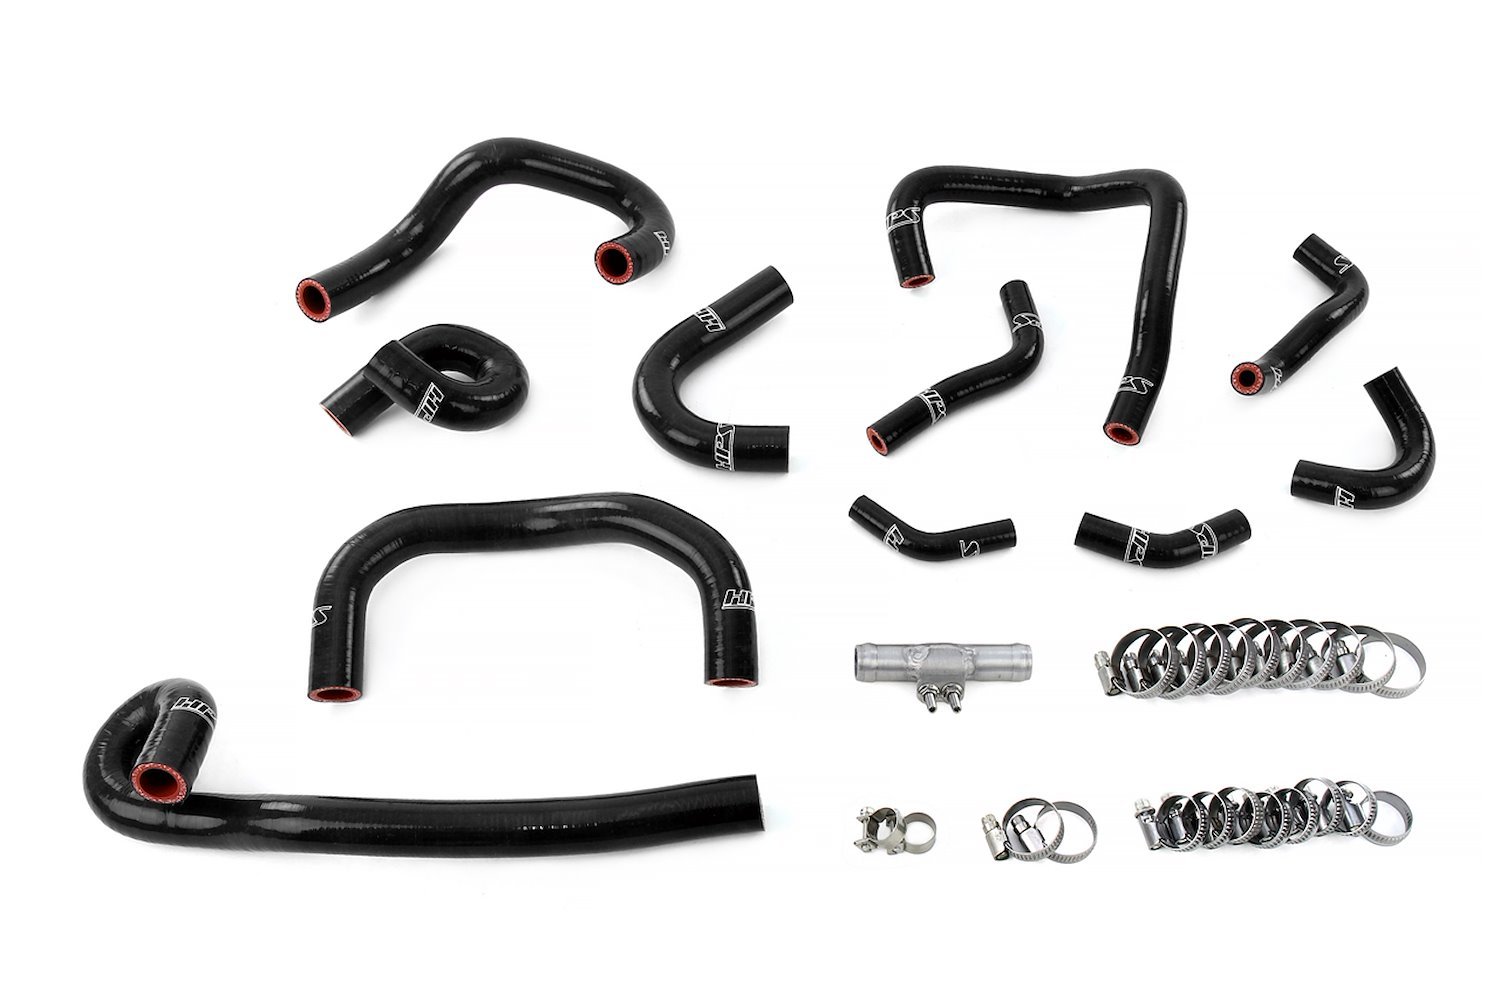 57-2139-BLK Coolant Hose Kit, 3-Ply Reinforced Silicone, Replaces Rubber Ancillary Coolant & Heater Hoses